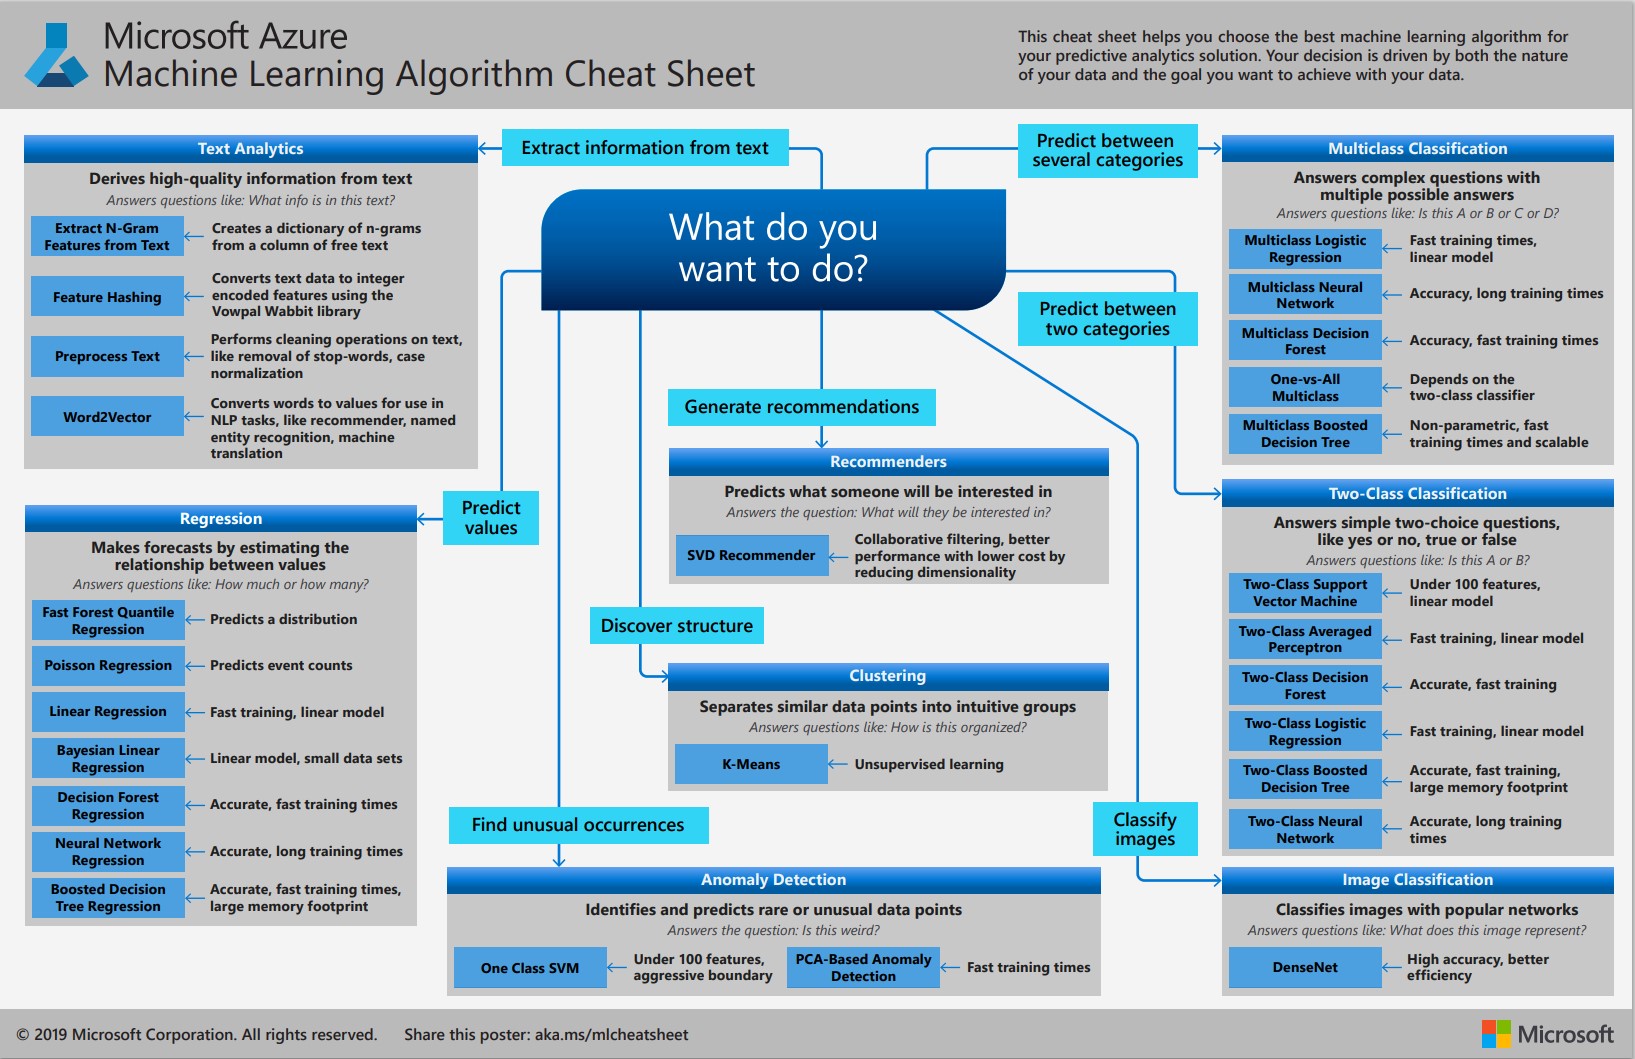 Flowchart-style diagram of the Machine Learning Algorithm Cheat Sheet.